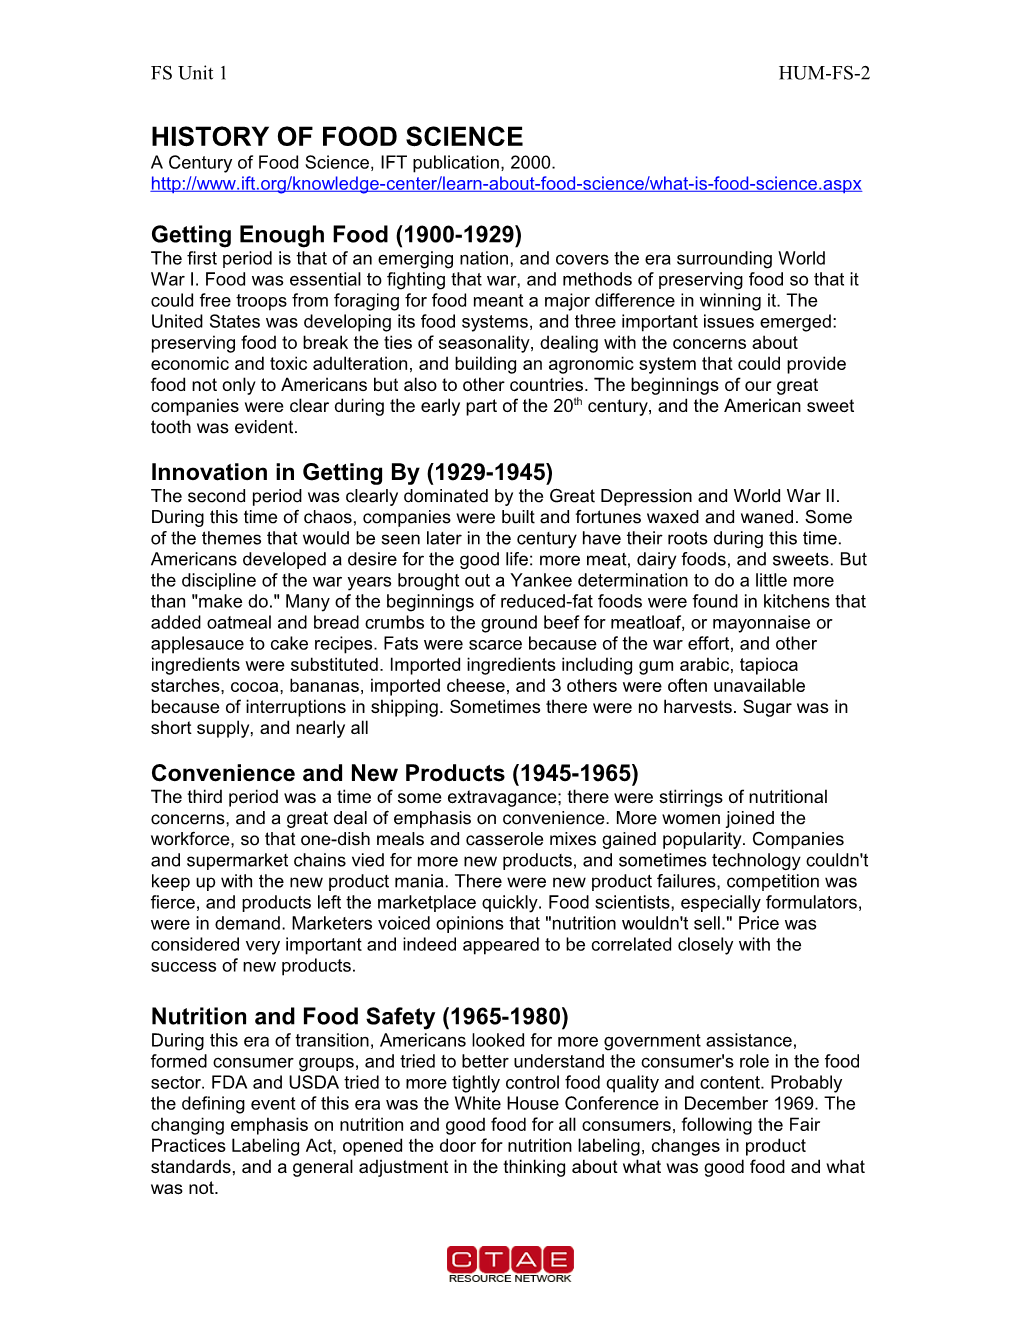 History of Food Science